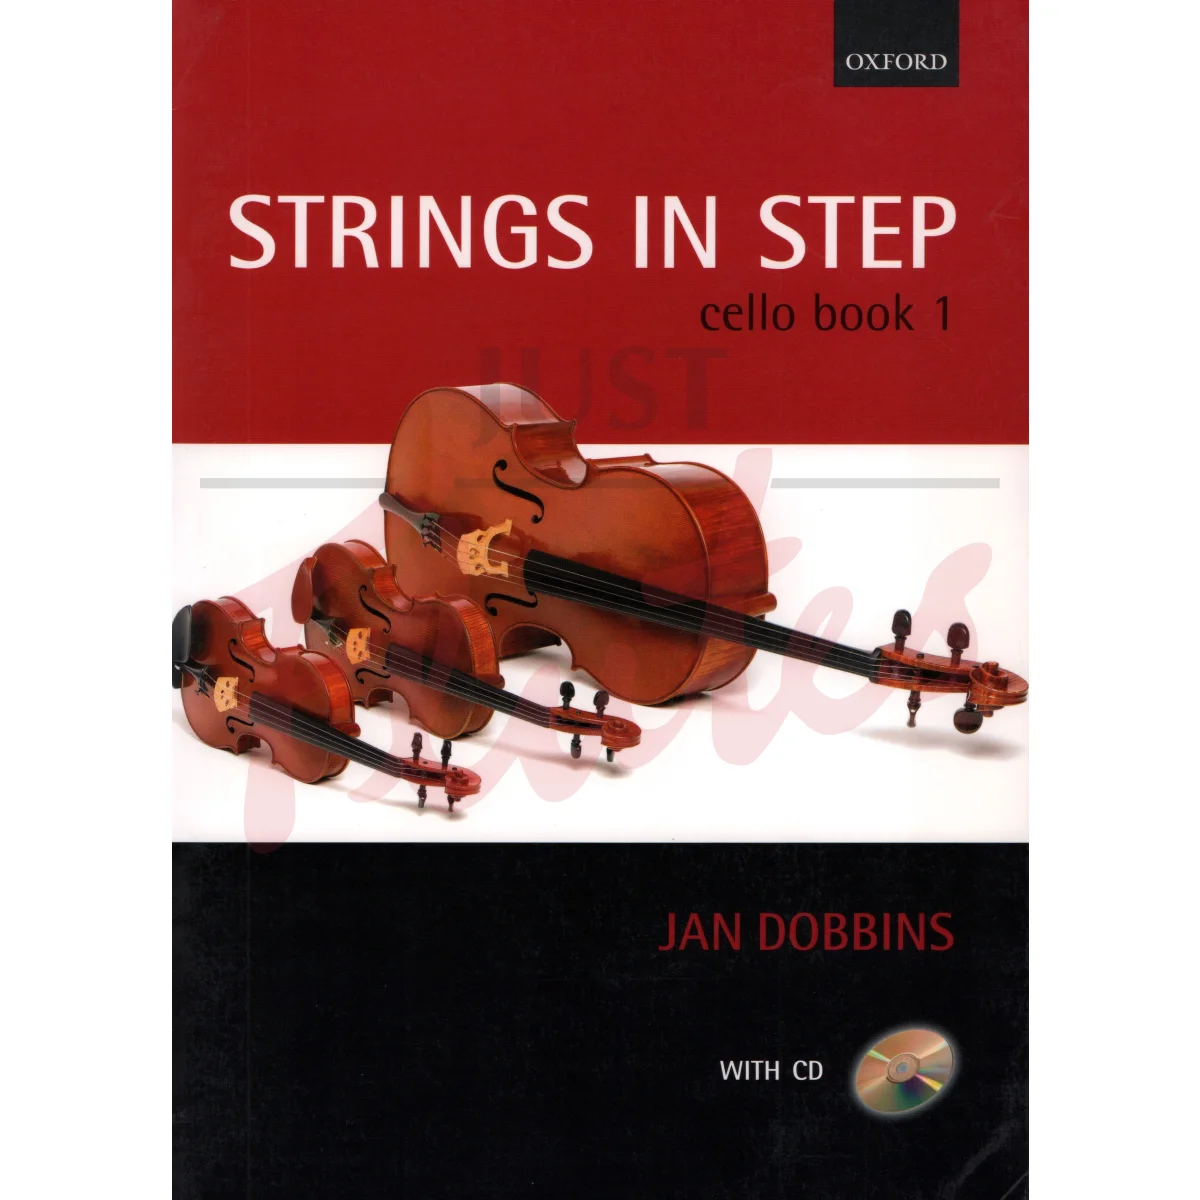 Strings In Step Book 1 for Cello